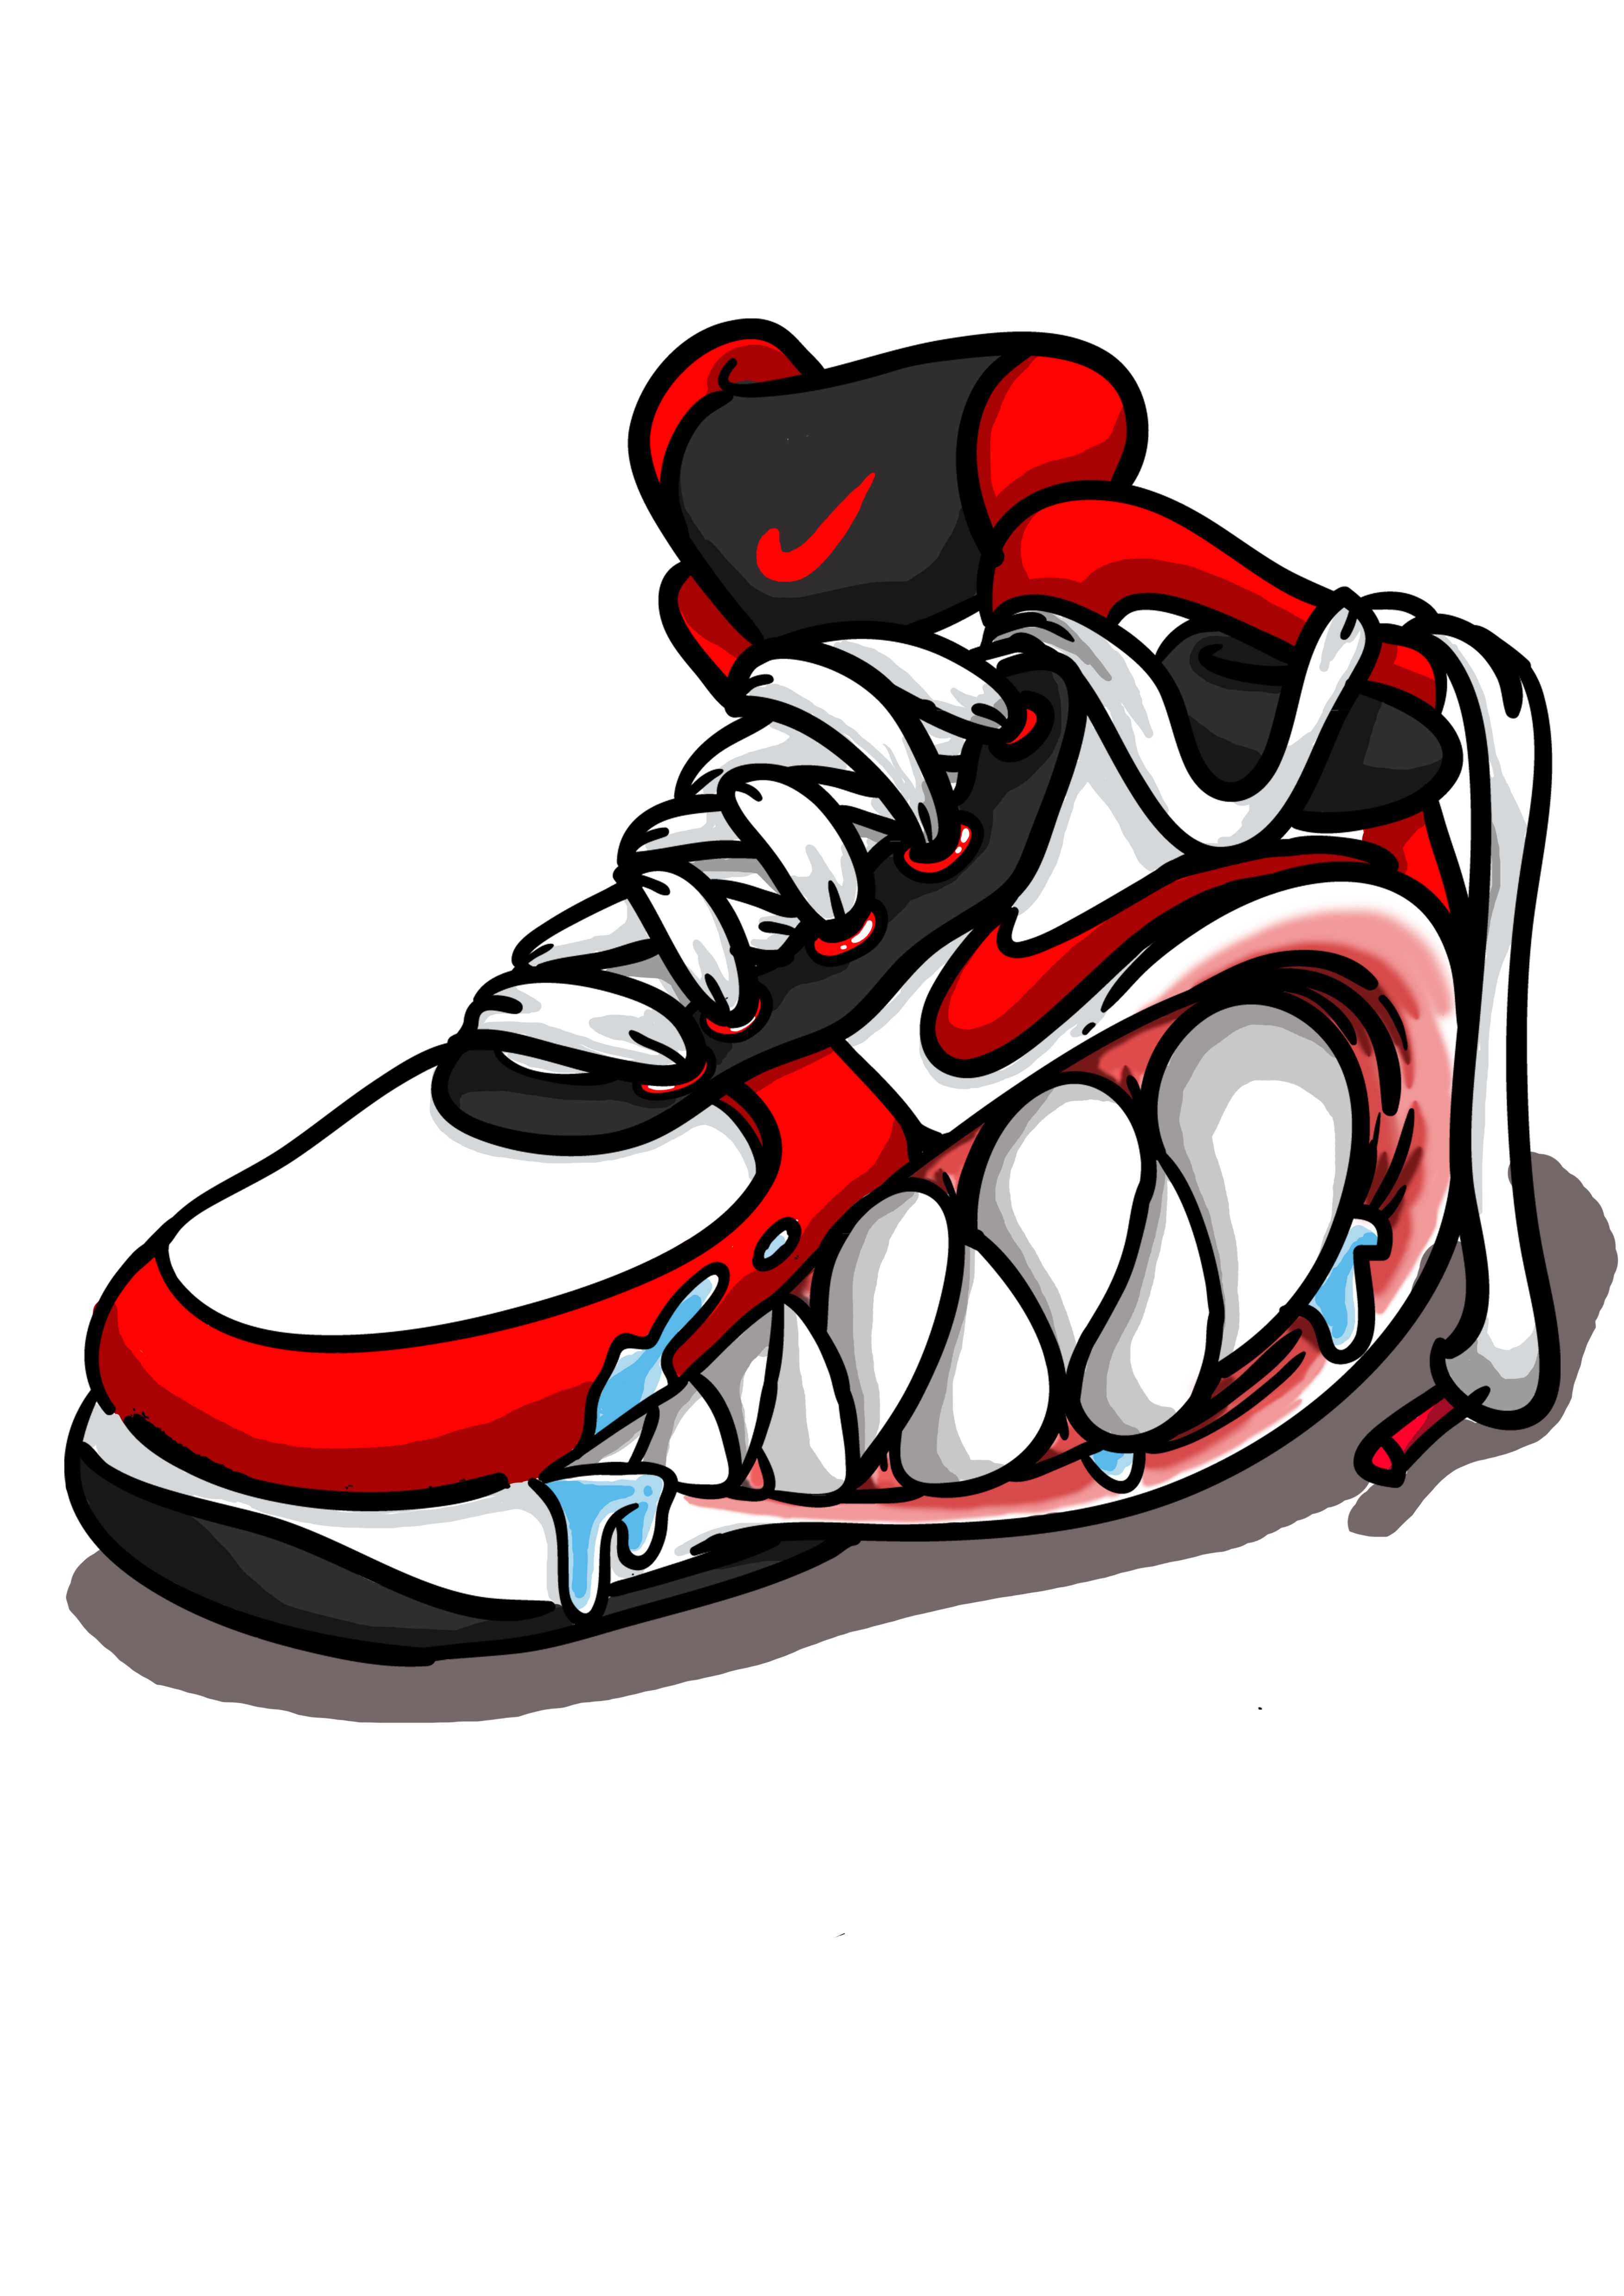 Download Nike Air Vector at Vectorified.com | Collection of Nike Air Vector free for personal use